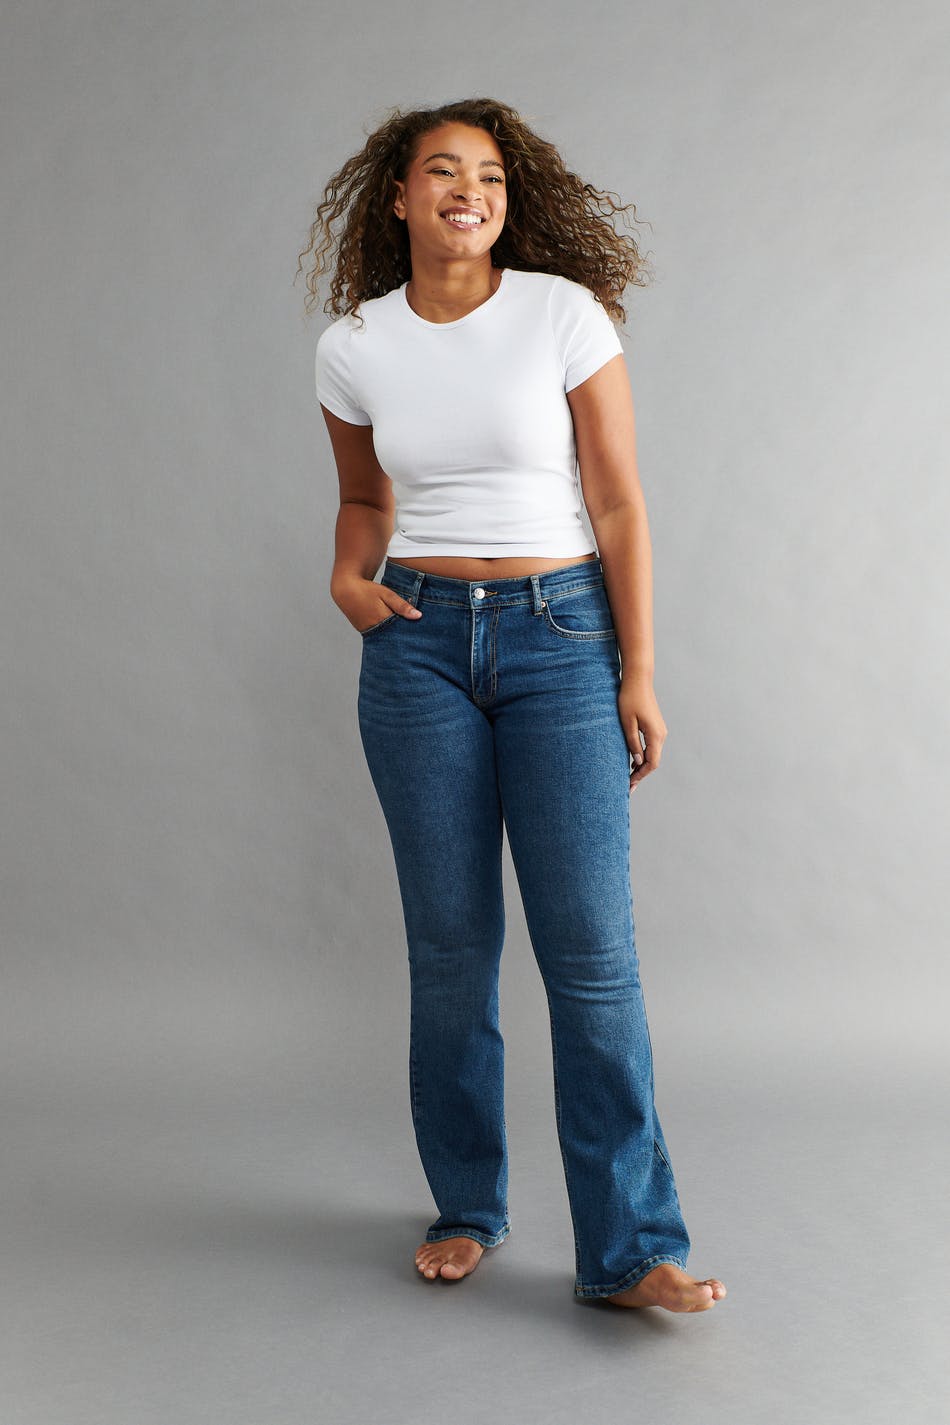 Low waist bootcut jeans, Gina Tricot